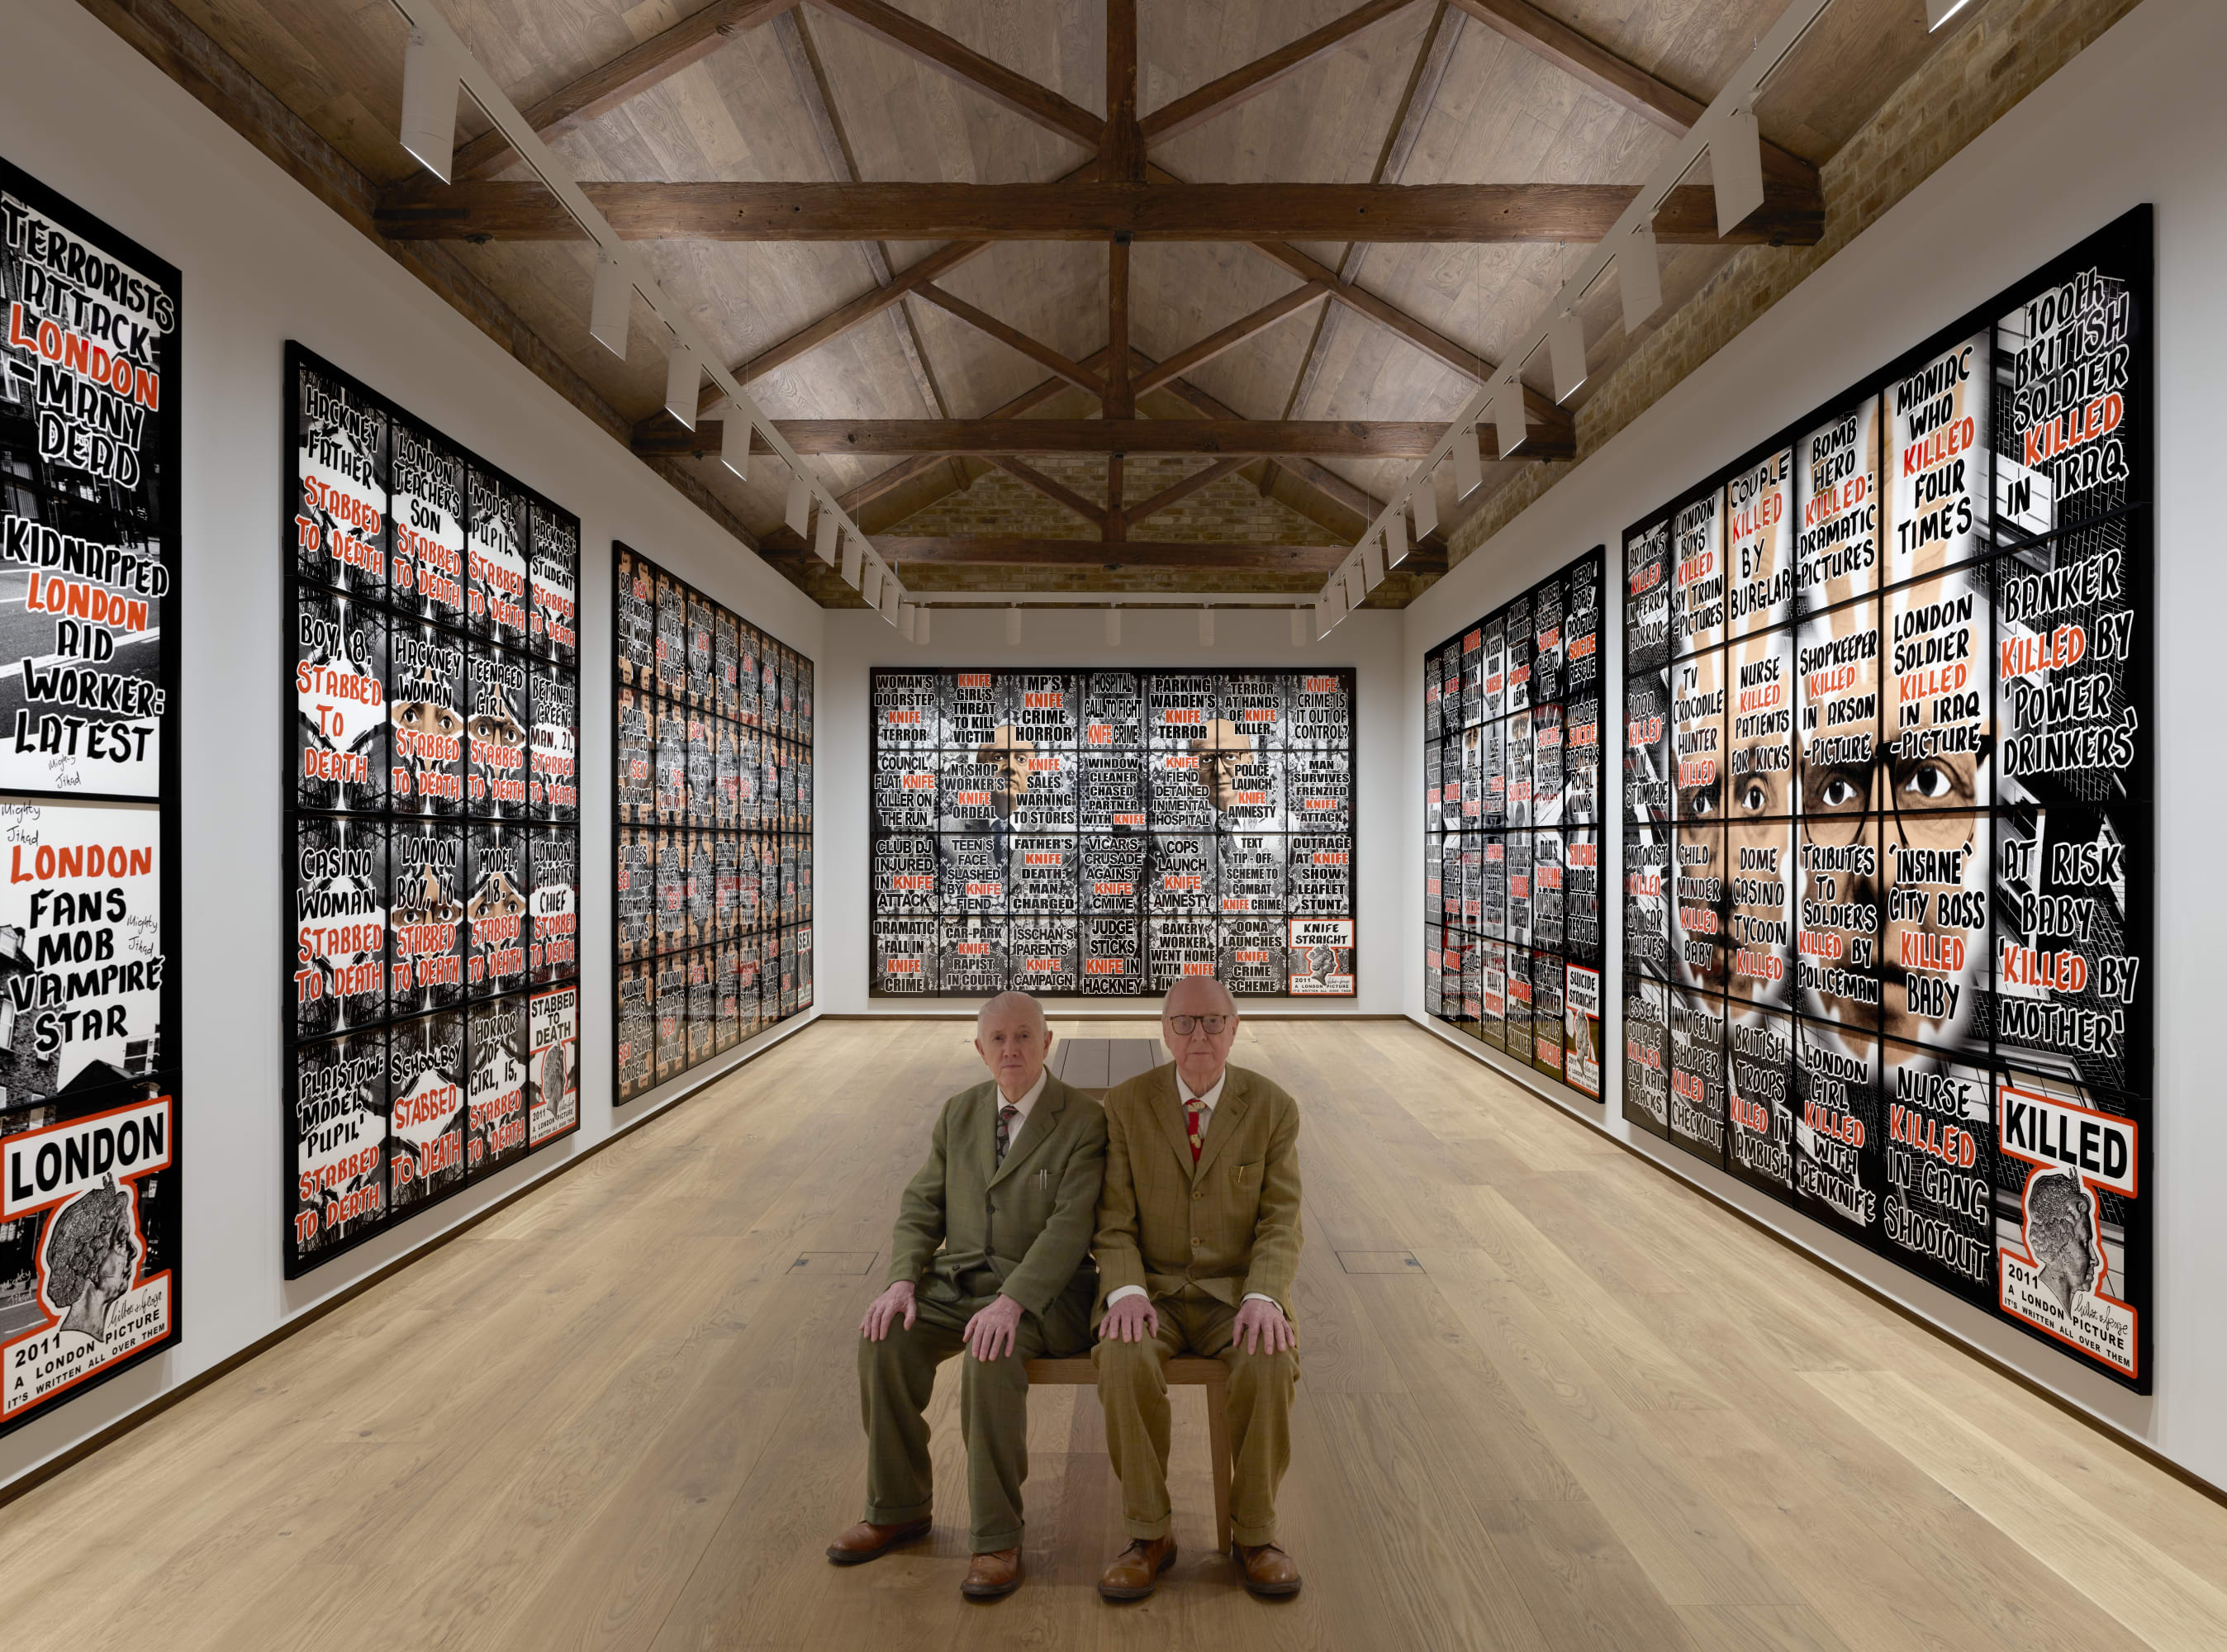 Dazzling Gilbert & George show celebrates London through iconic newspaper posters ‘We live what we see and we see what...